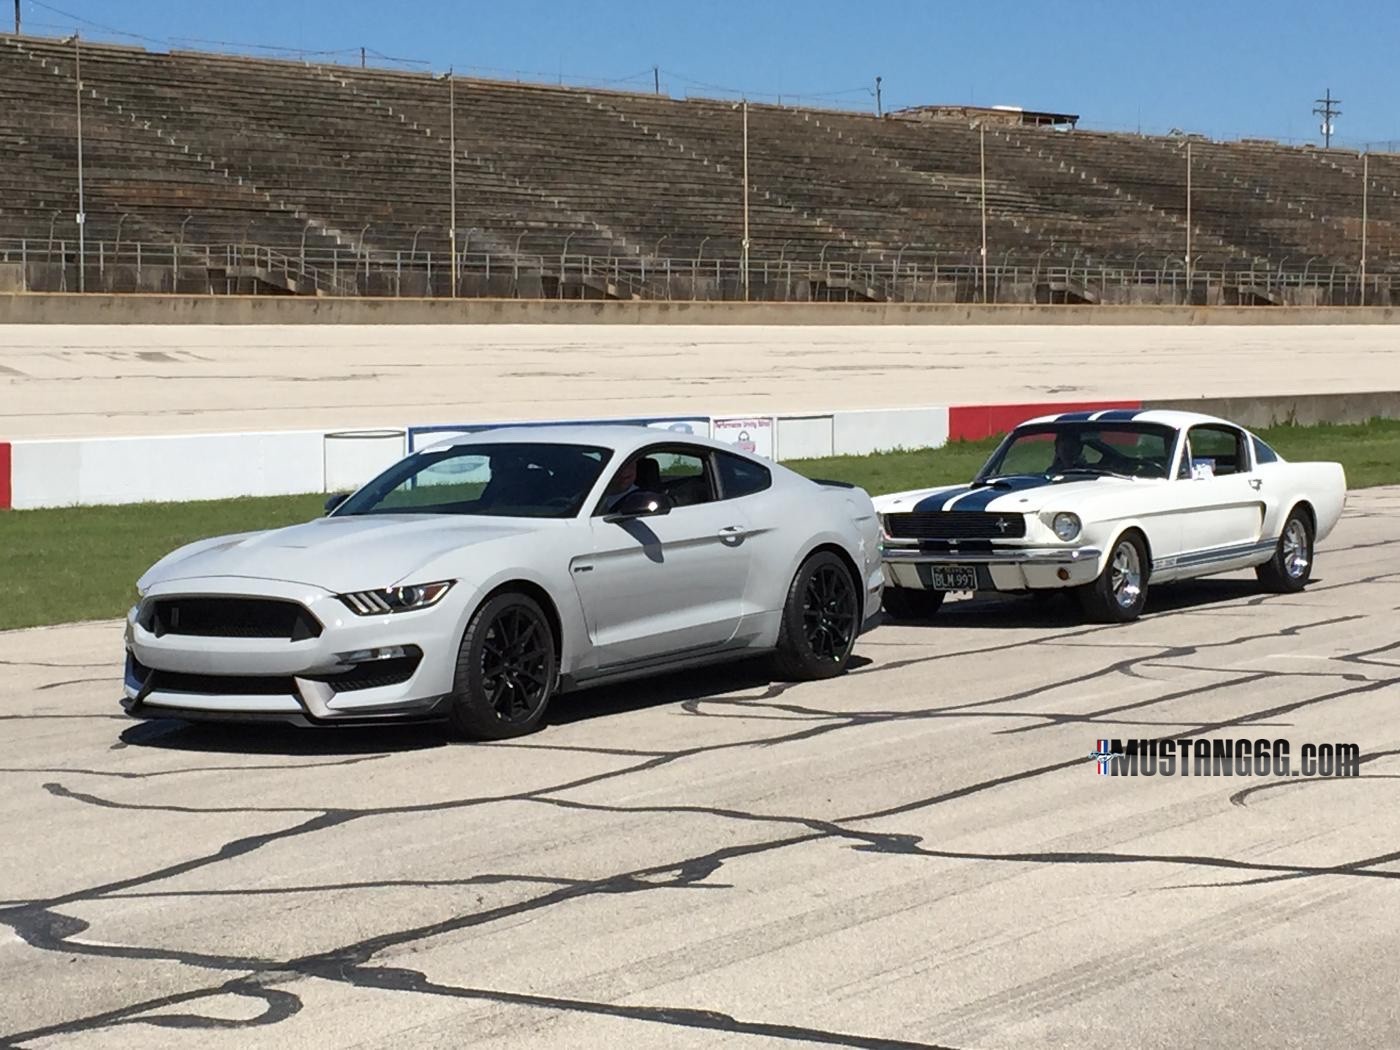 2016-shelby-gt350-mustang-tires-to-be-available-from-june-15-video-photo-gallery_10.jpg